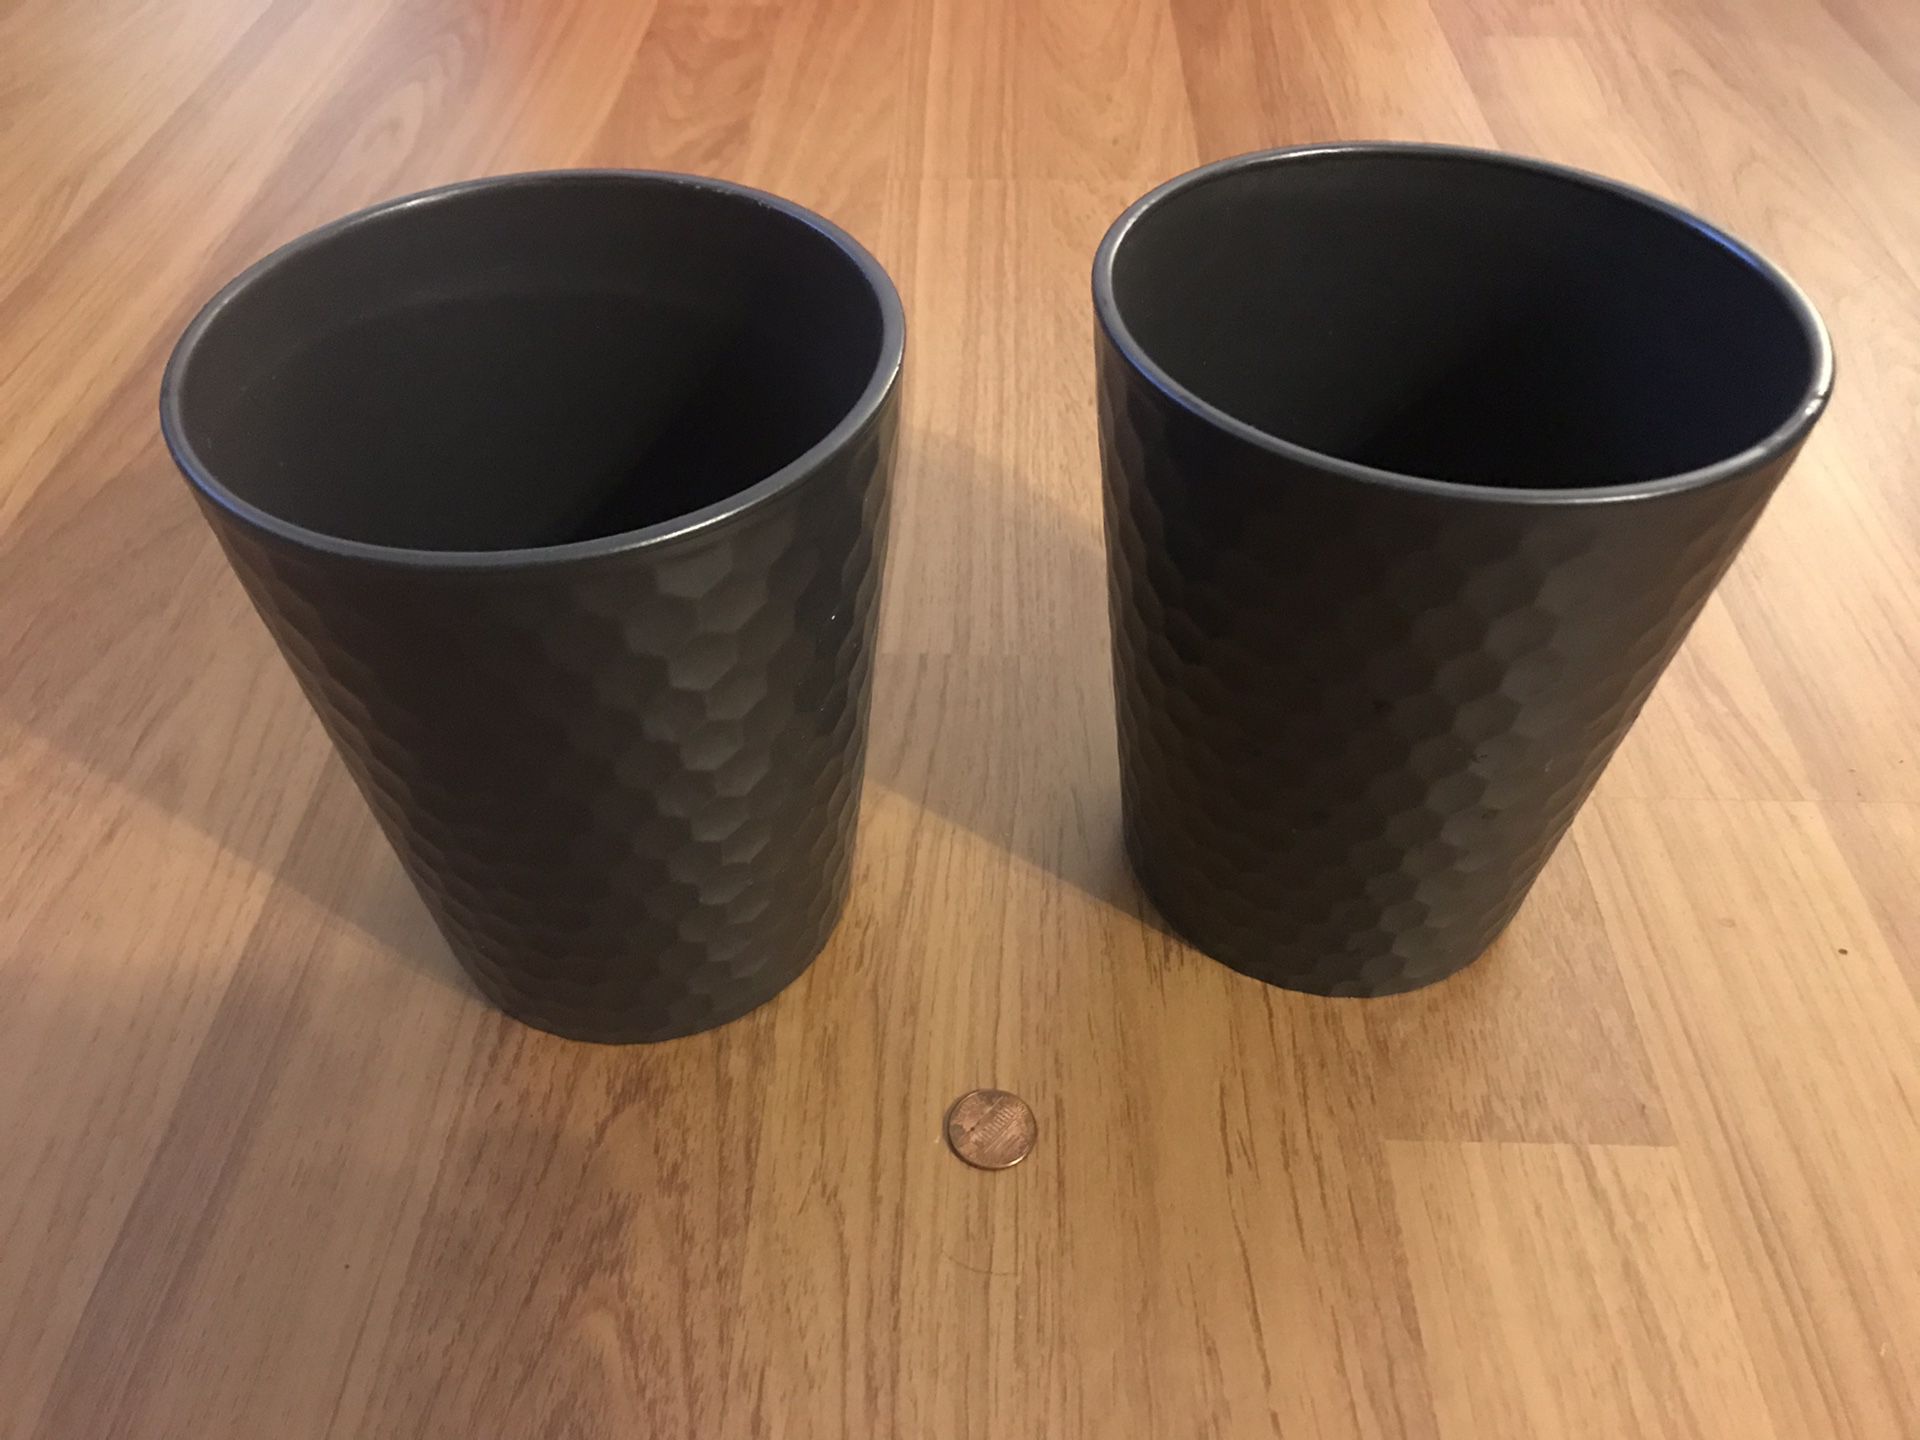 Flower pots. Small. Black pattern. 2 for $6.